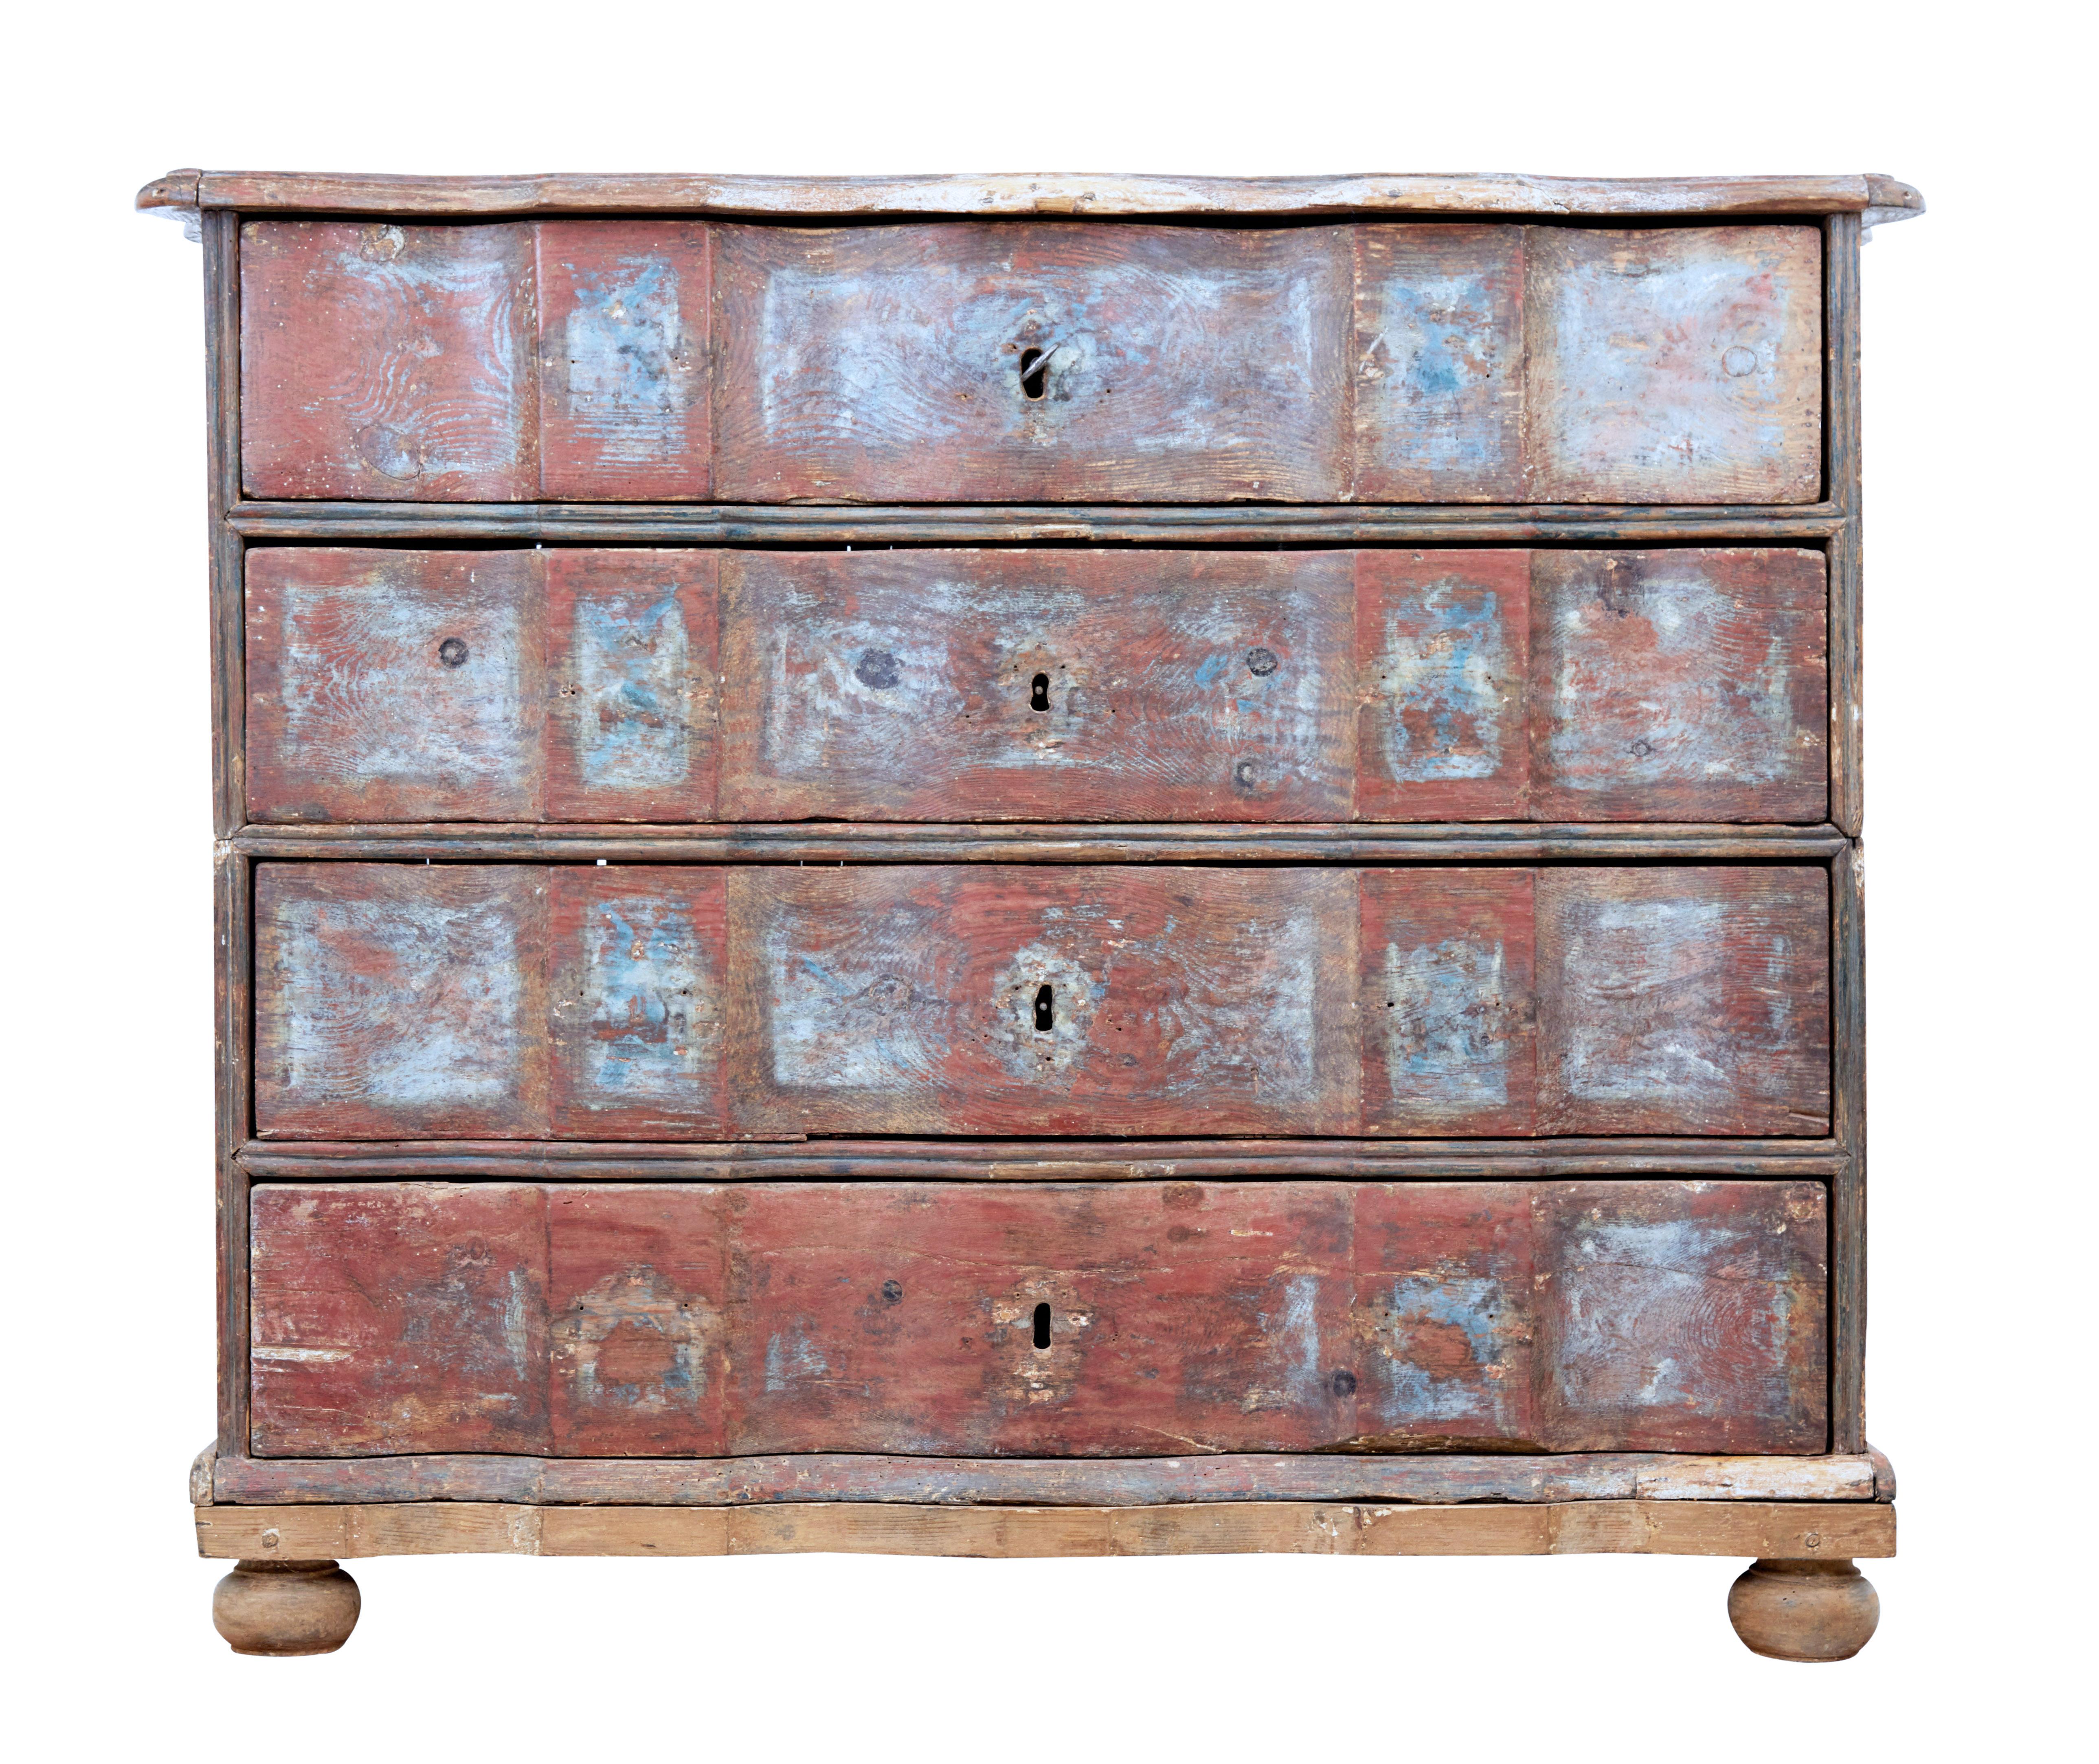 Rare Danish commode with traces of original paint, circa 1750.

2 part chest, made this way because of its generous proportions. Separate later base and feet.

Beautiful scalloped shaped top and drawer fronts. 4 drawers which open on the key.